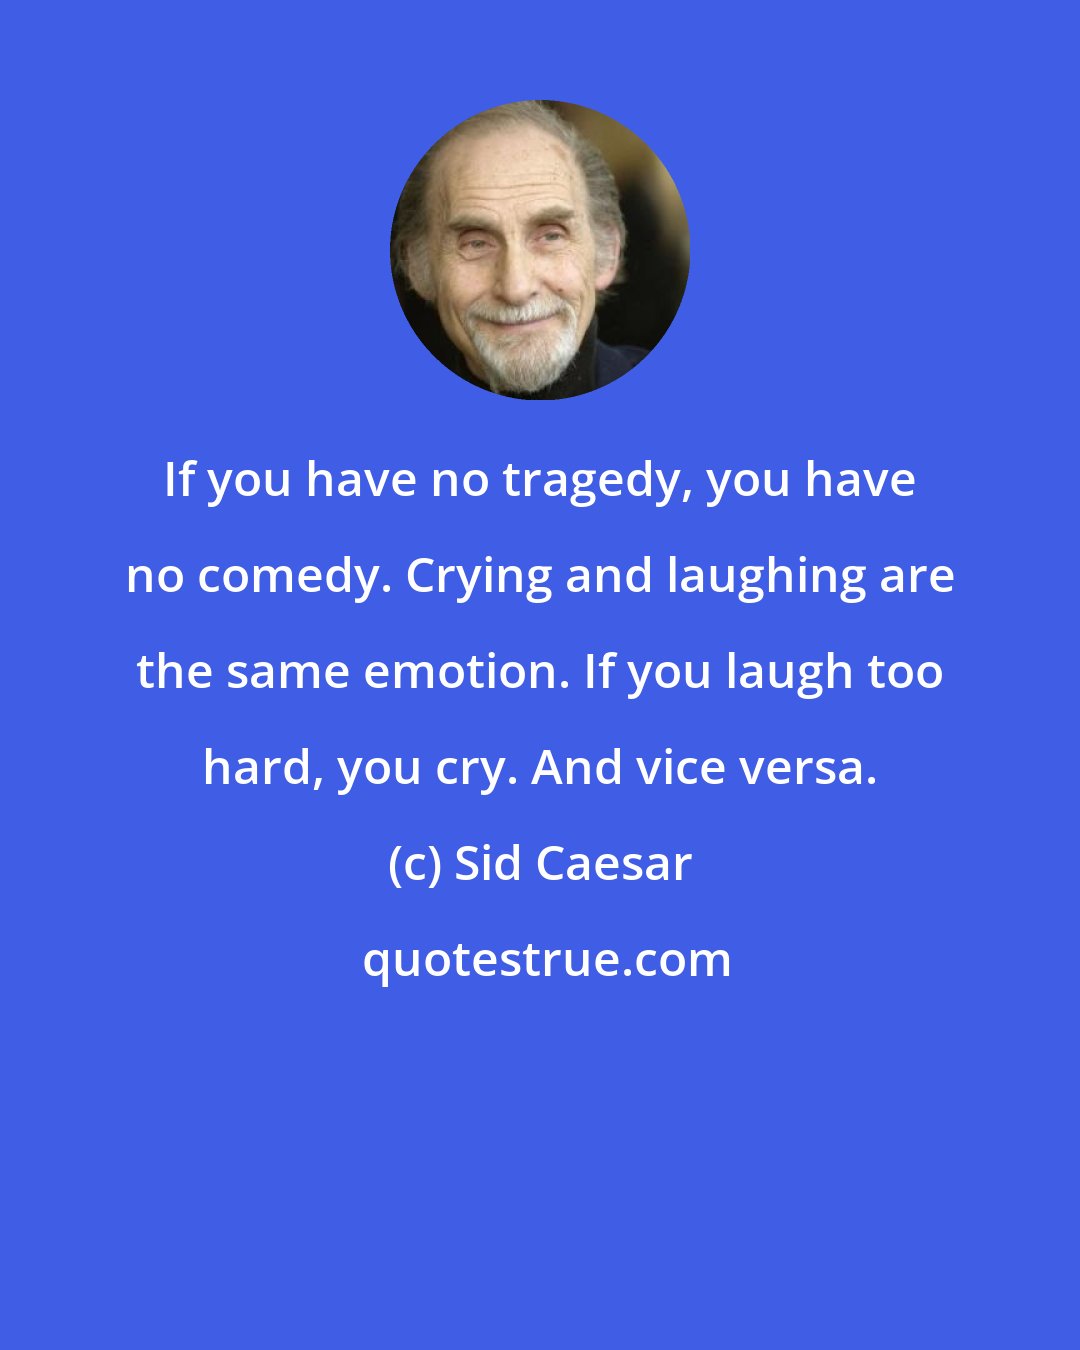 Sid Caesar: If you have no tragedy, you have no comedy. Crying and laughing are the same emotion. If you laugh too hard, you cry. And vice versa.